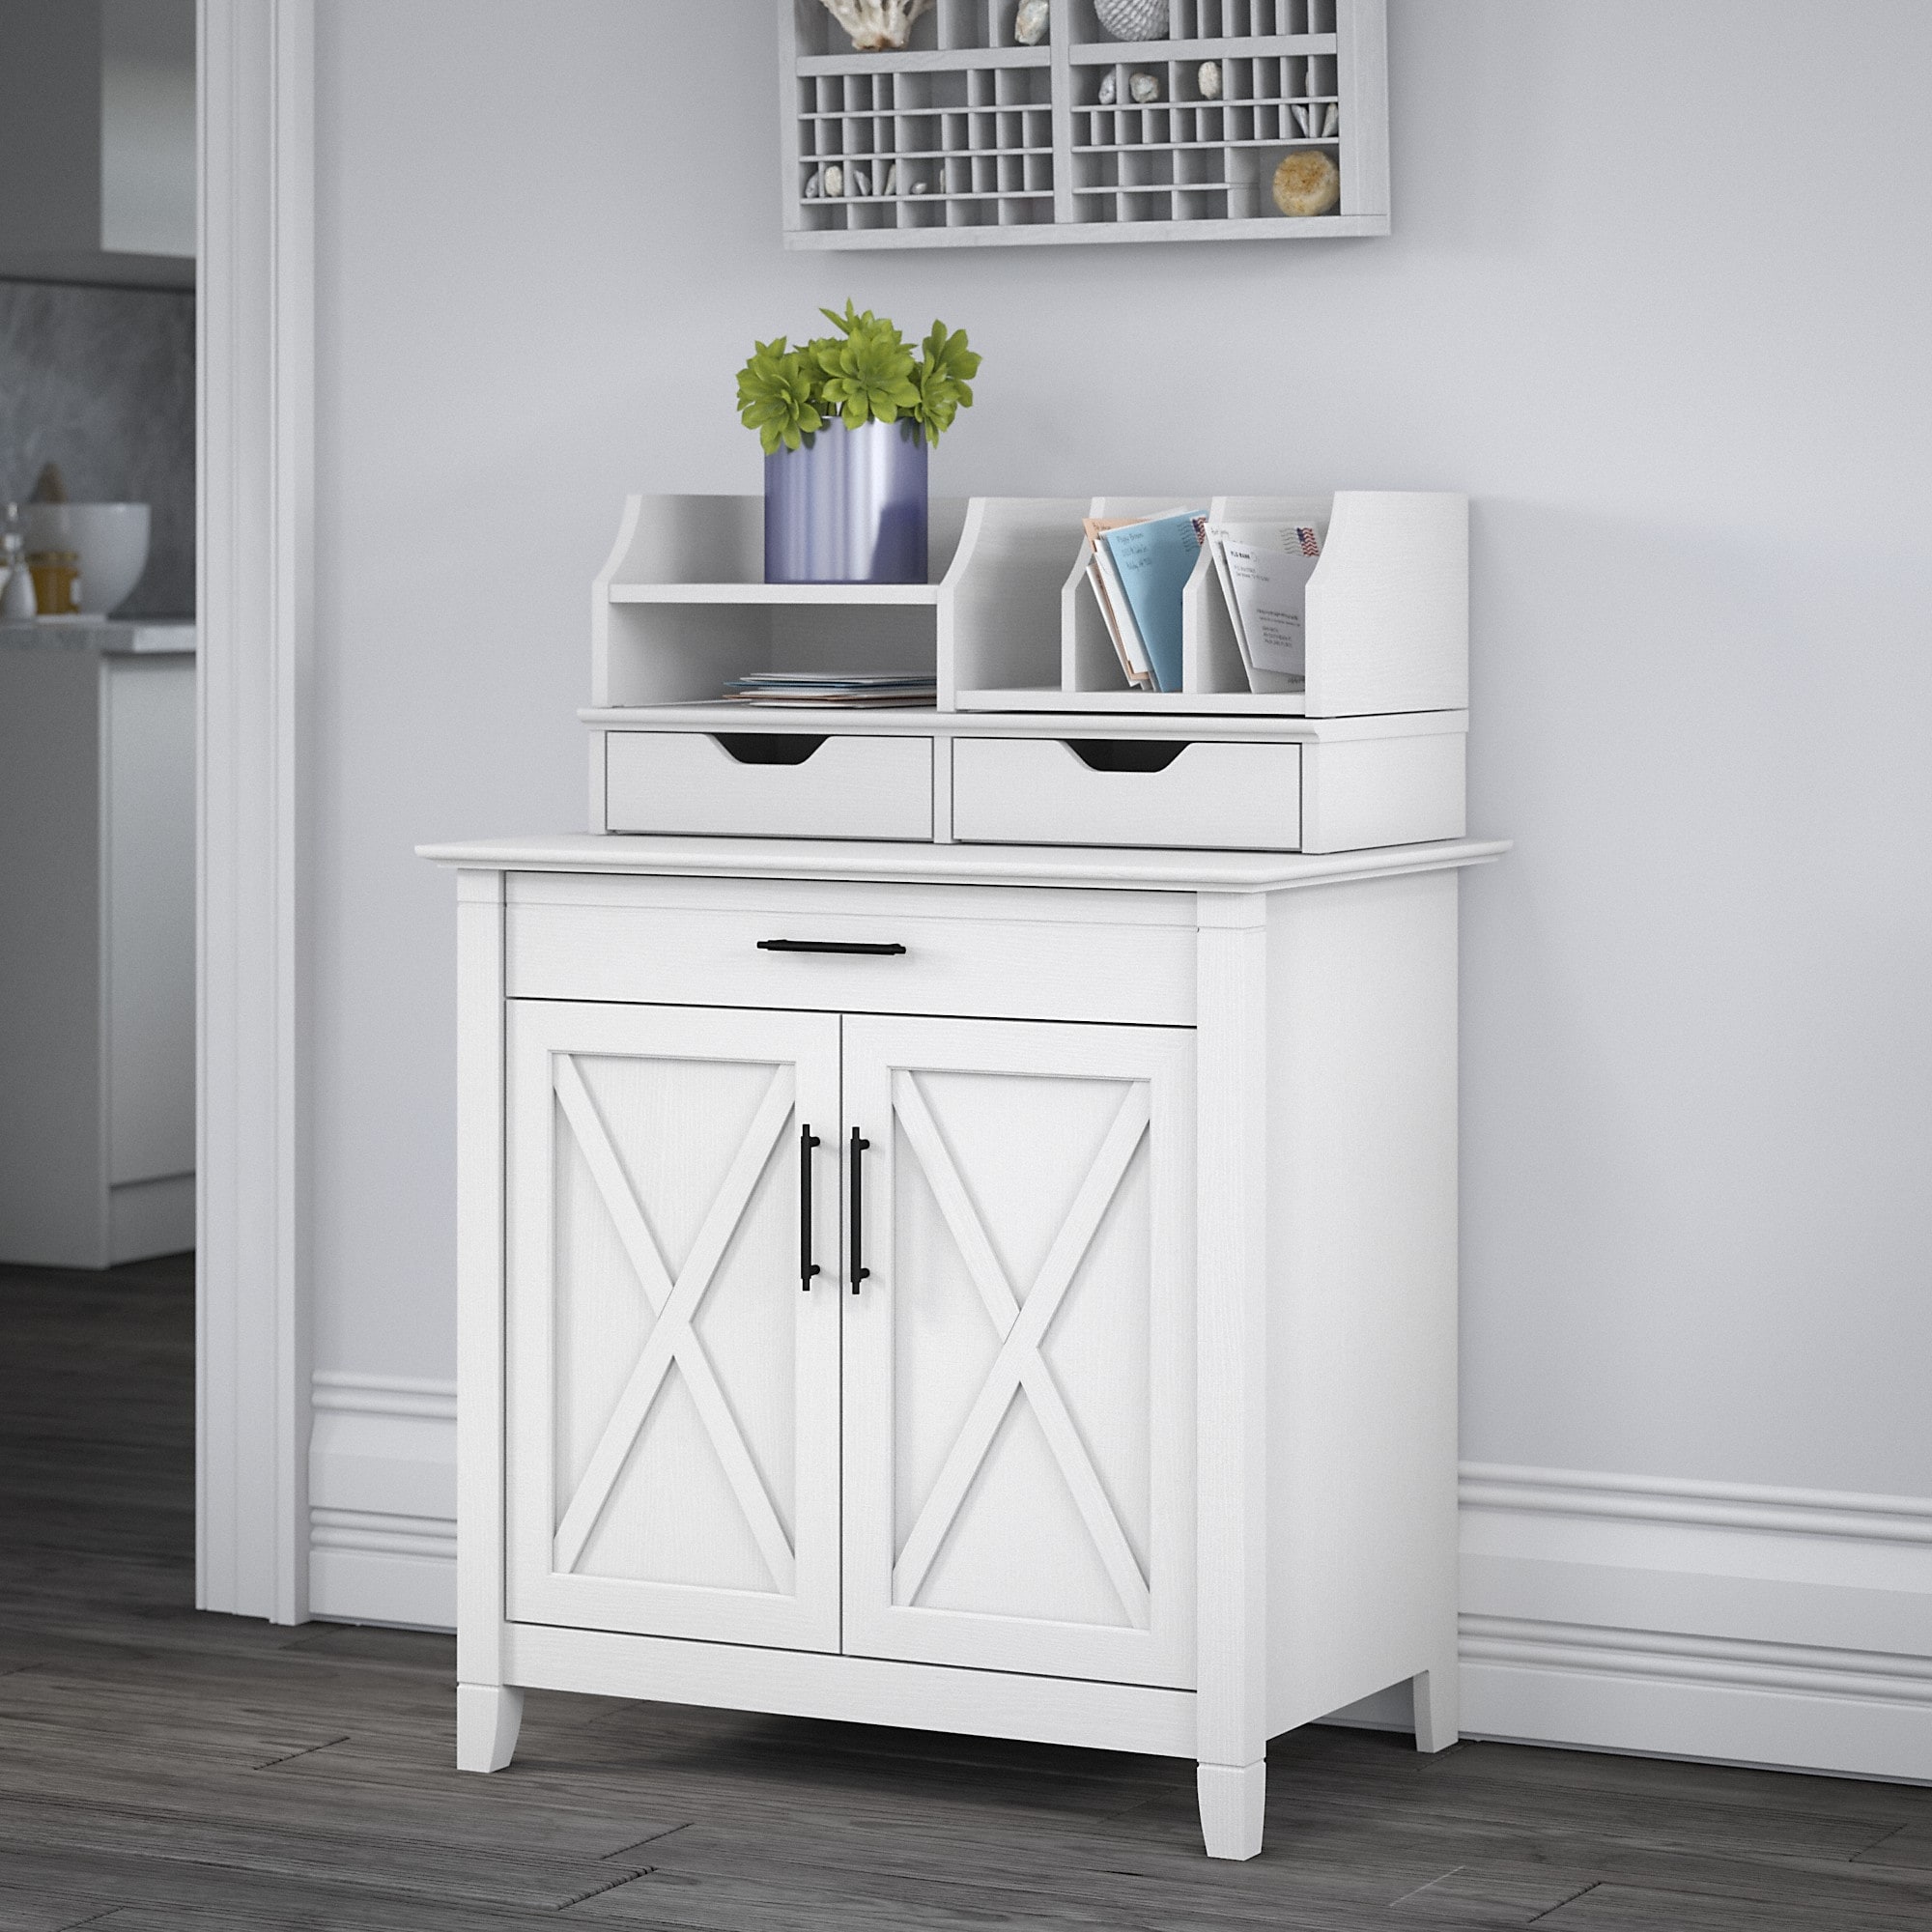 Bush Furniture Key West Small Coffee Bar with Drawer, Washed Gray